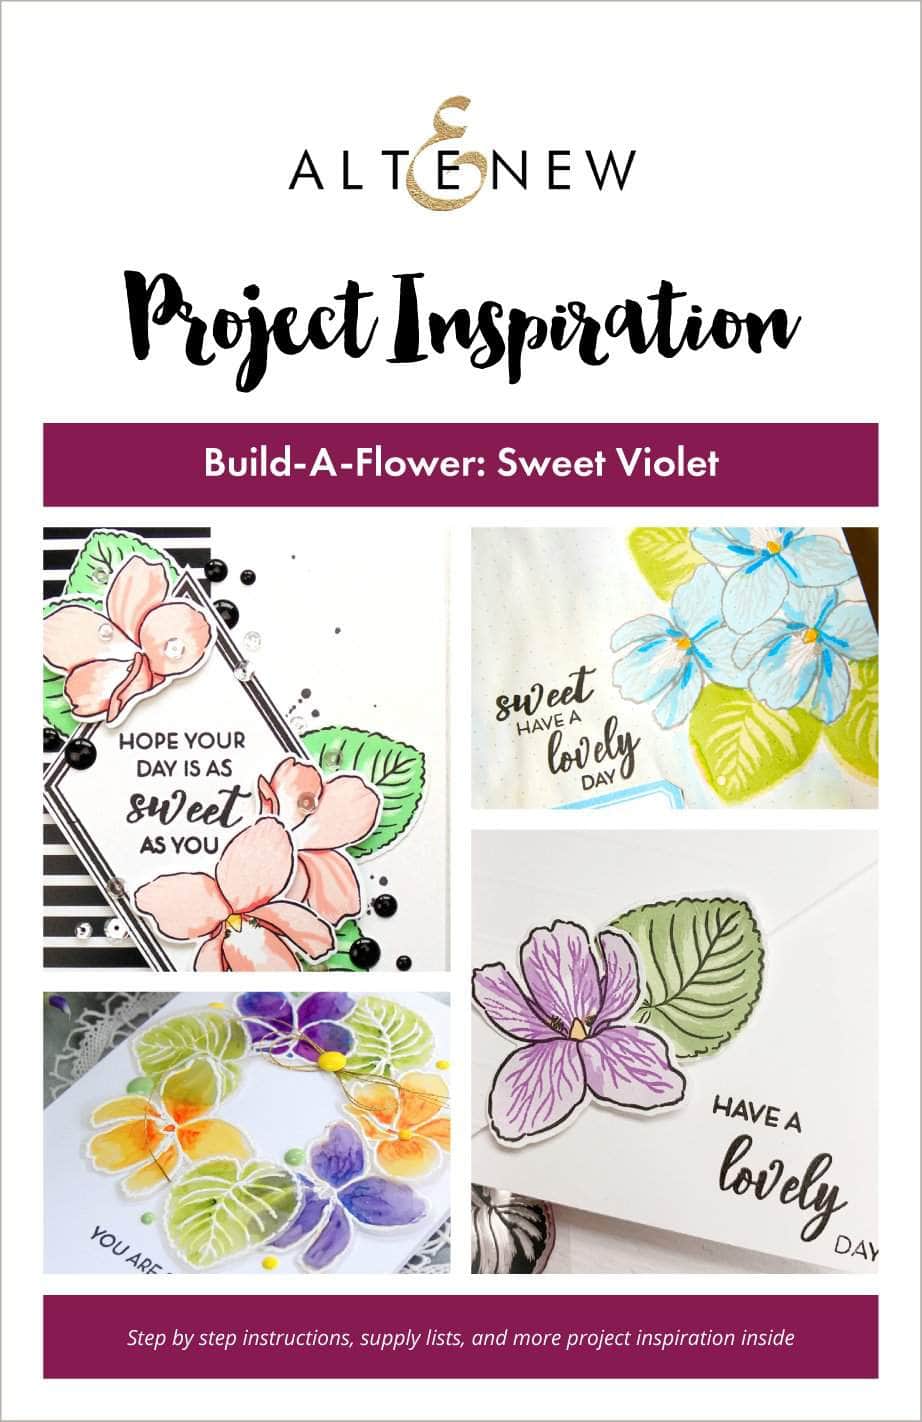 55Printing.com Printed Media Build-A-Flower: Sweet Violet Project Inspiration Guide